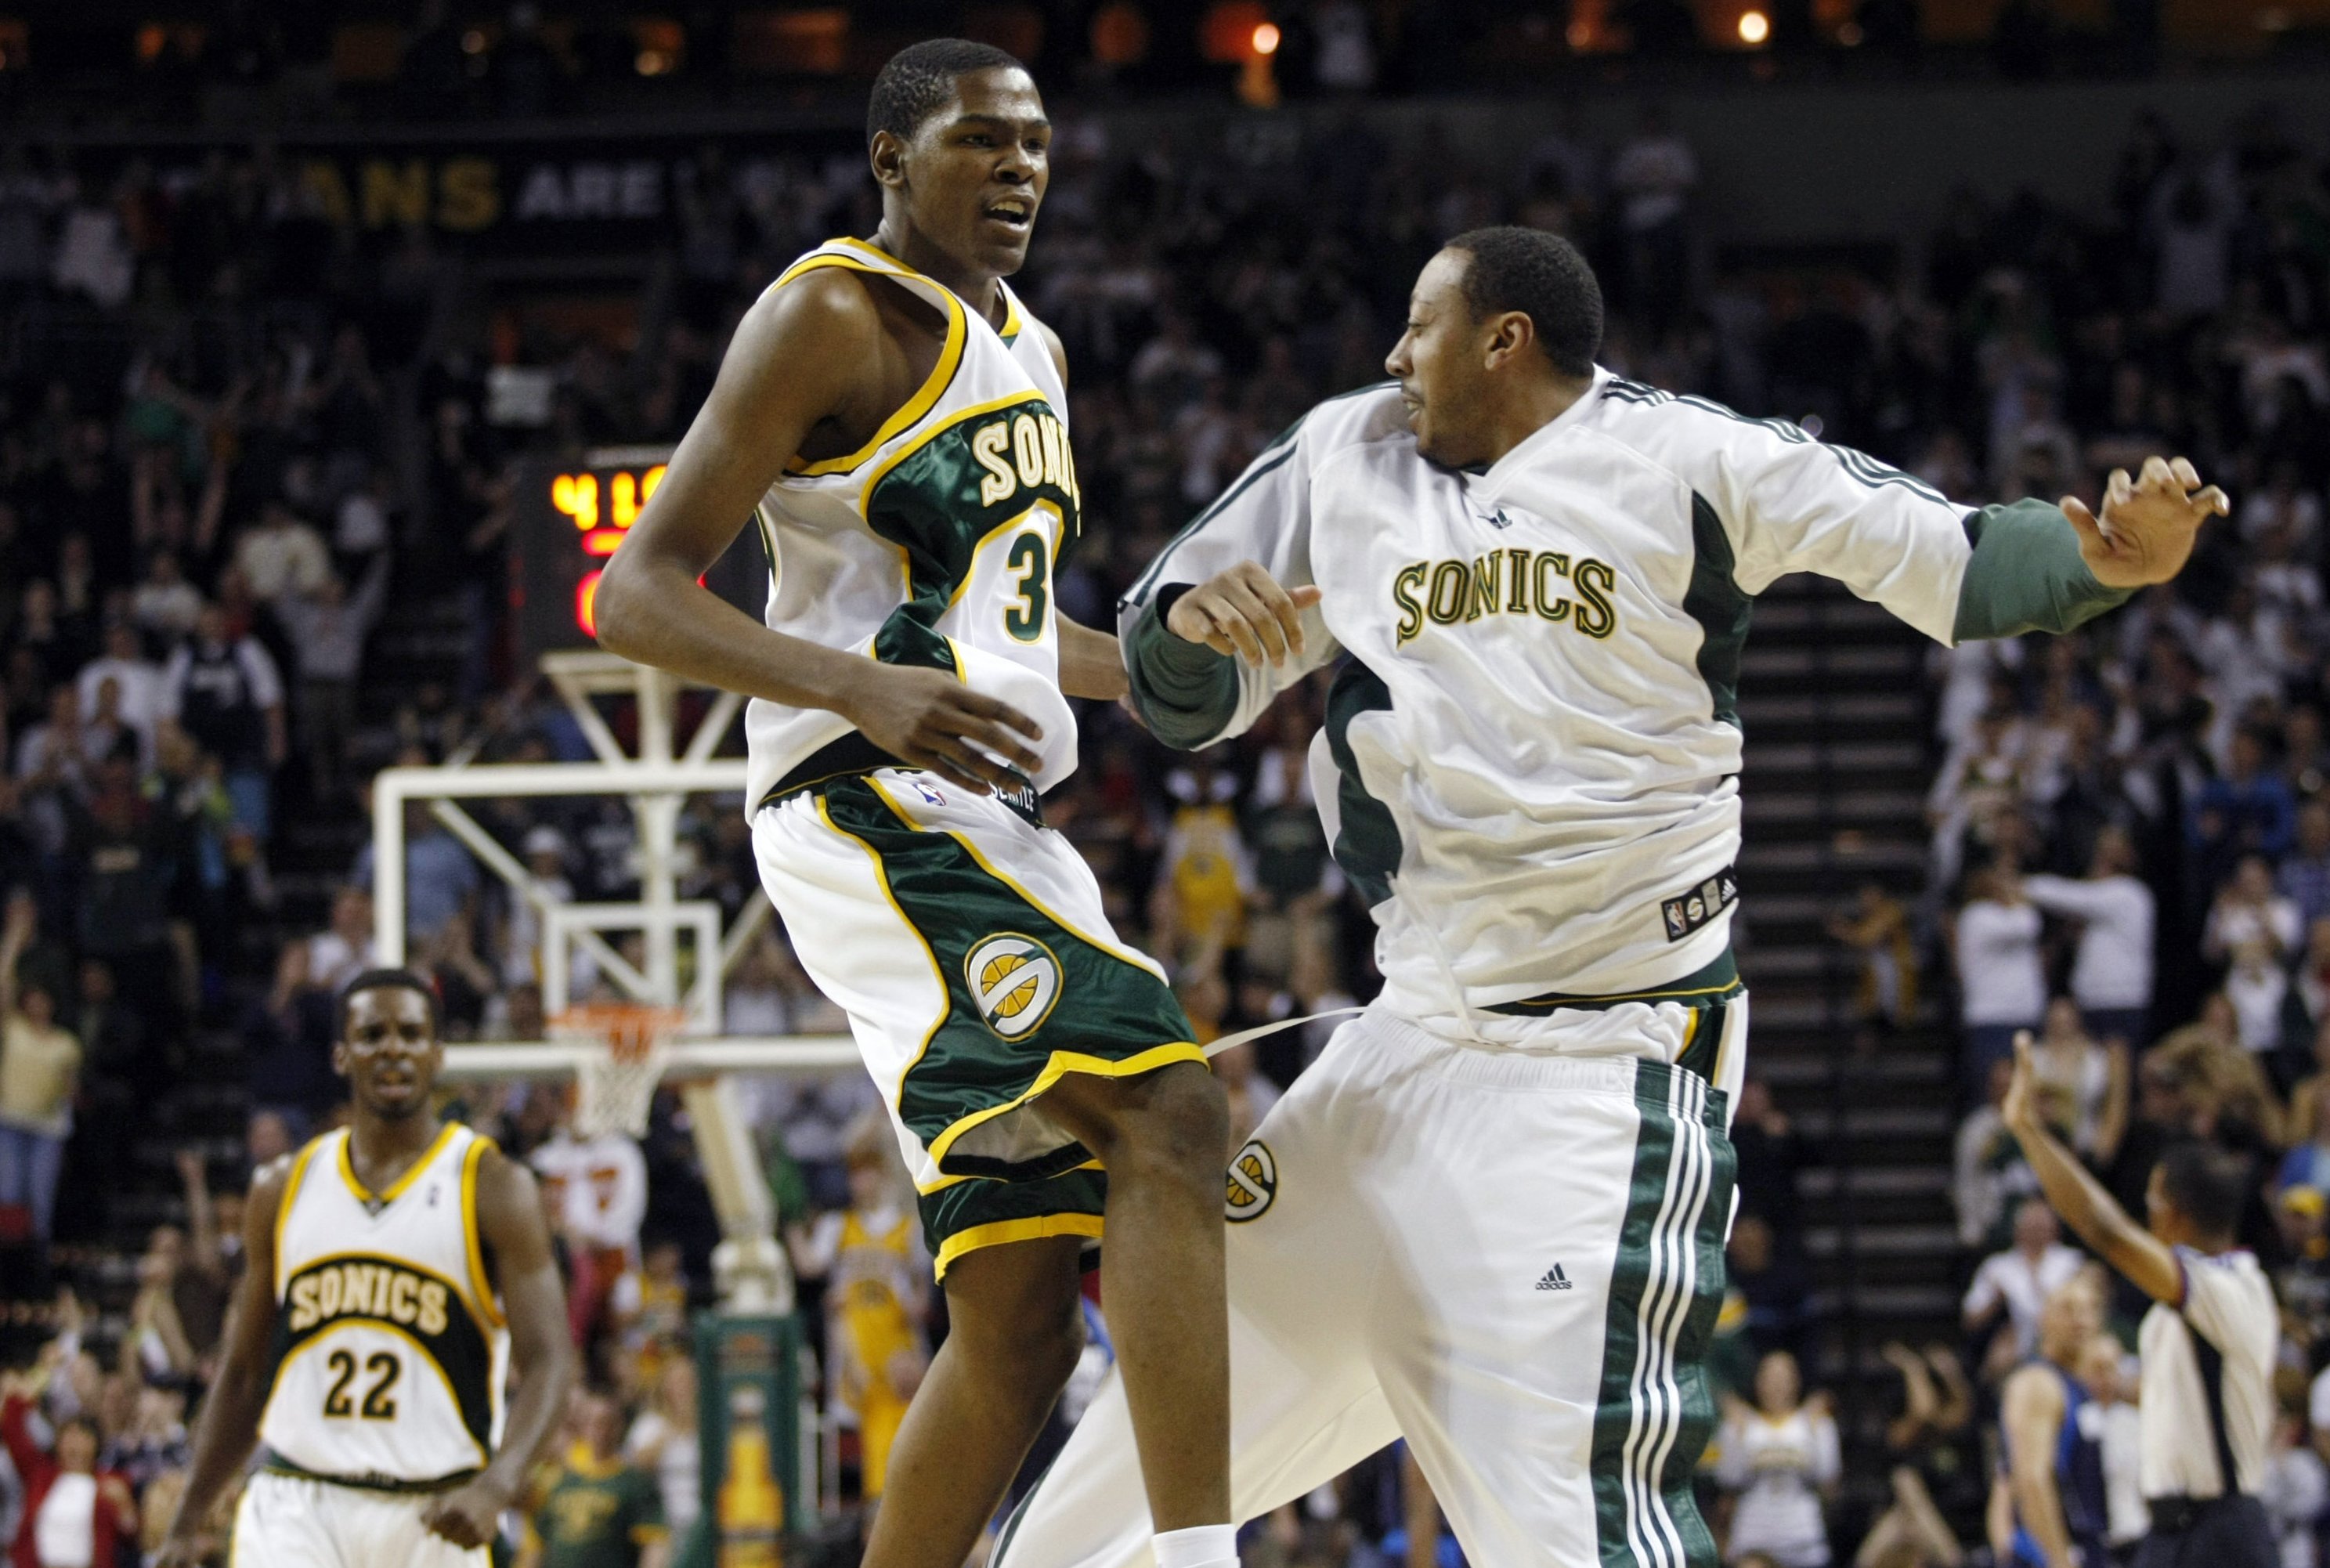 Durant gives suport ​to return the Sonics to Seattle - Basketball Network -  Your daily dose of basketball